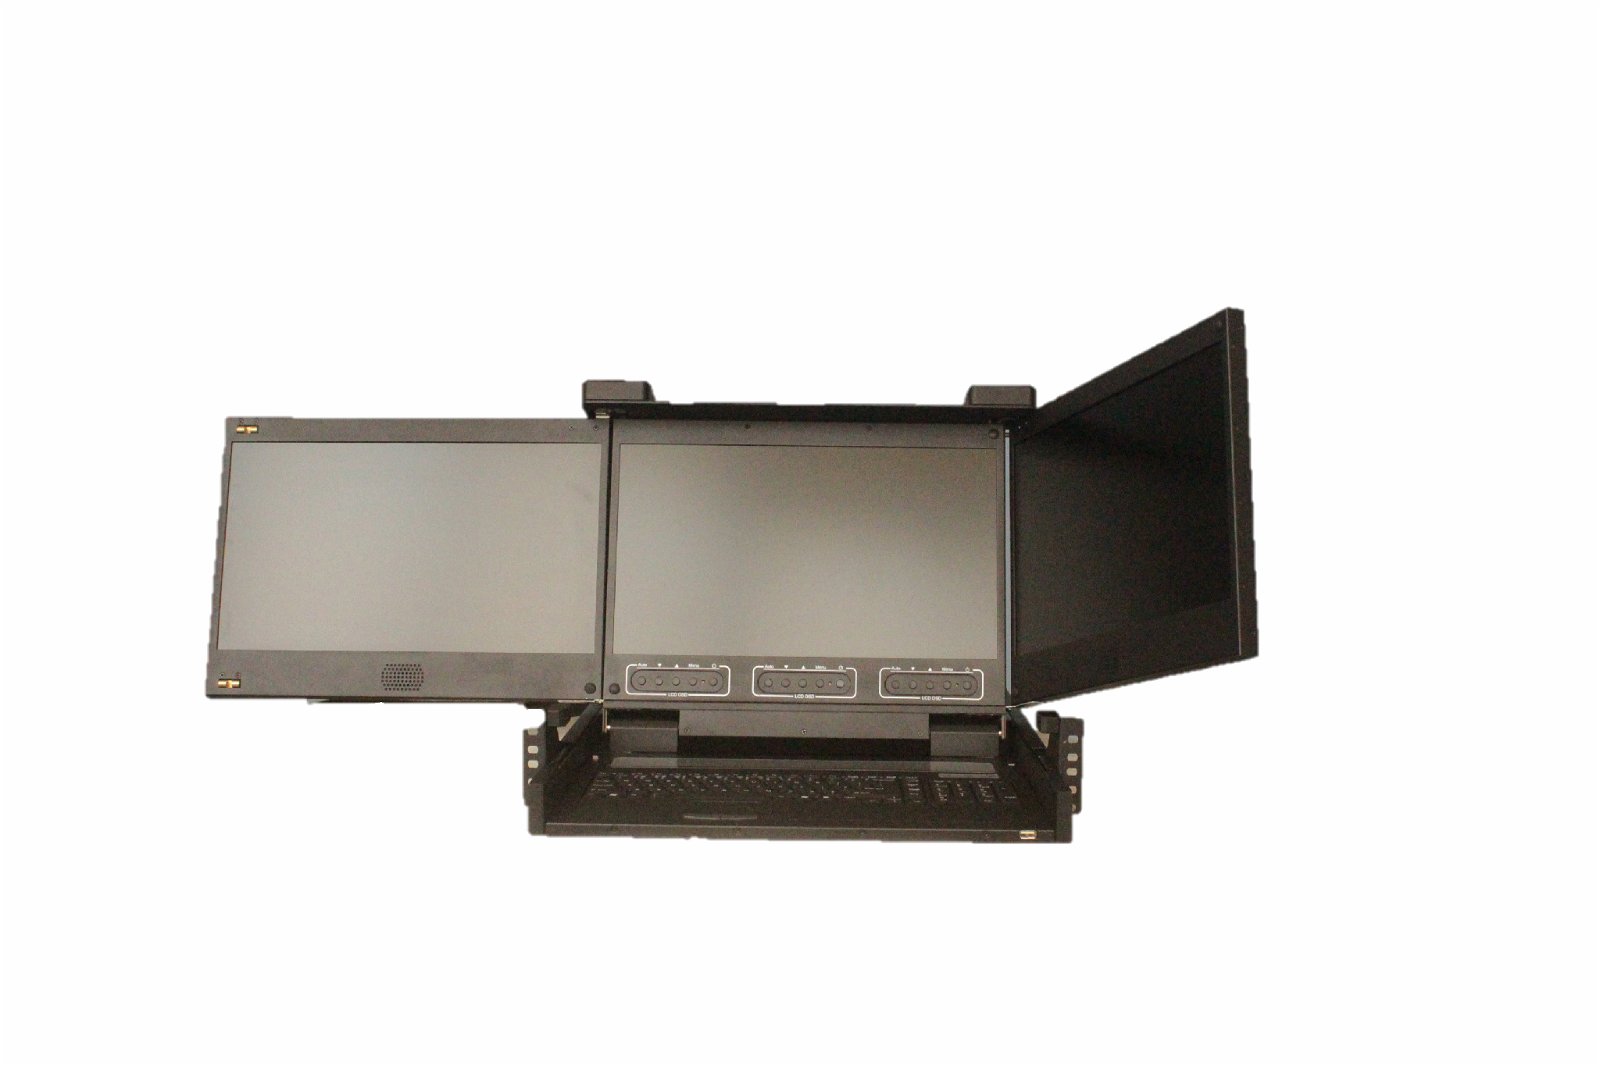 Triple Screen LCD Console Drawers 5